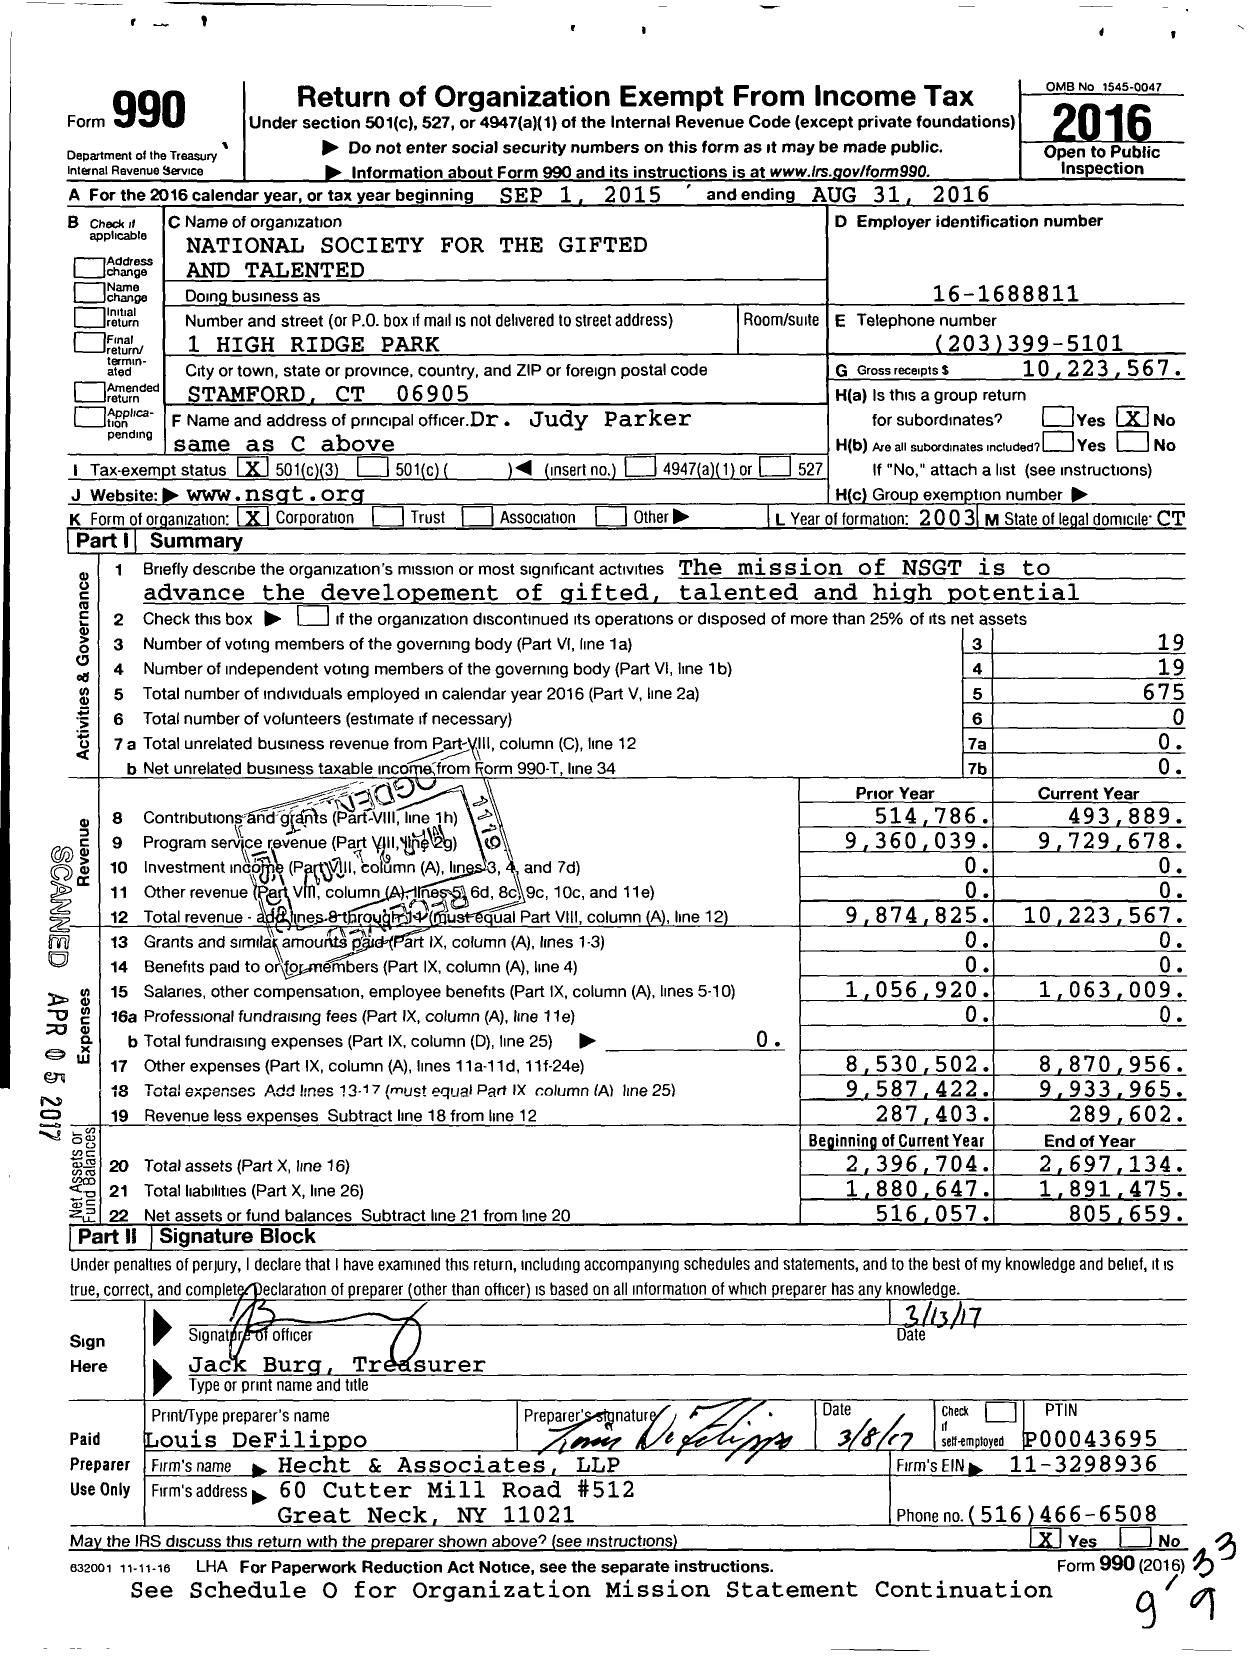 Image of first page of 2015 Form 990 for National Society for the Gifted and Talented (NSGT)